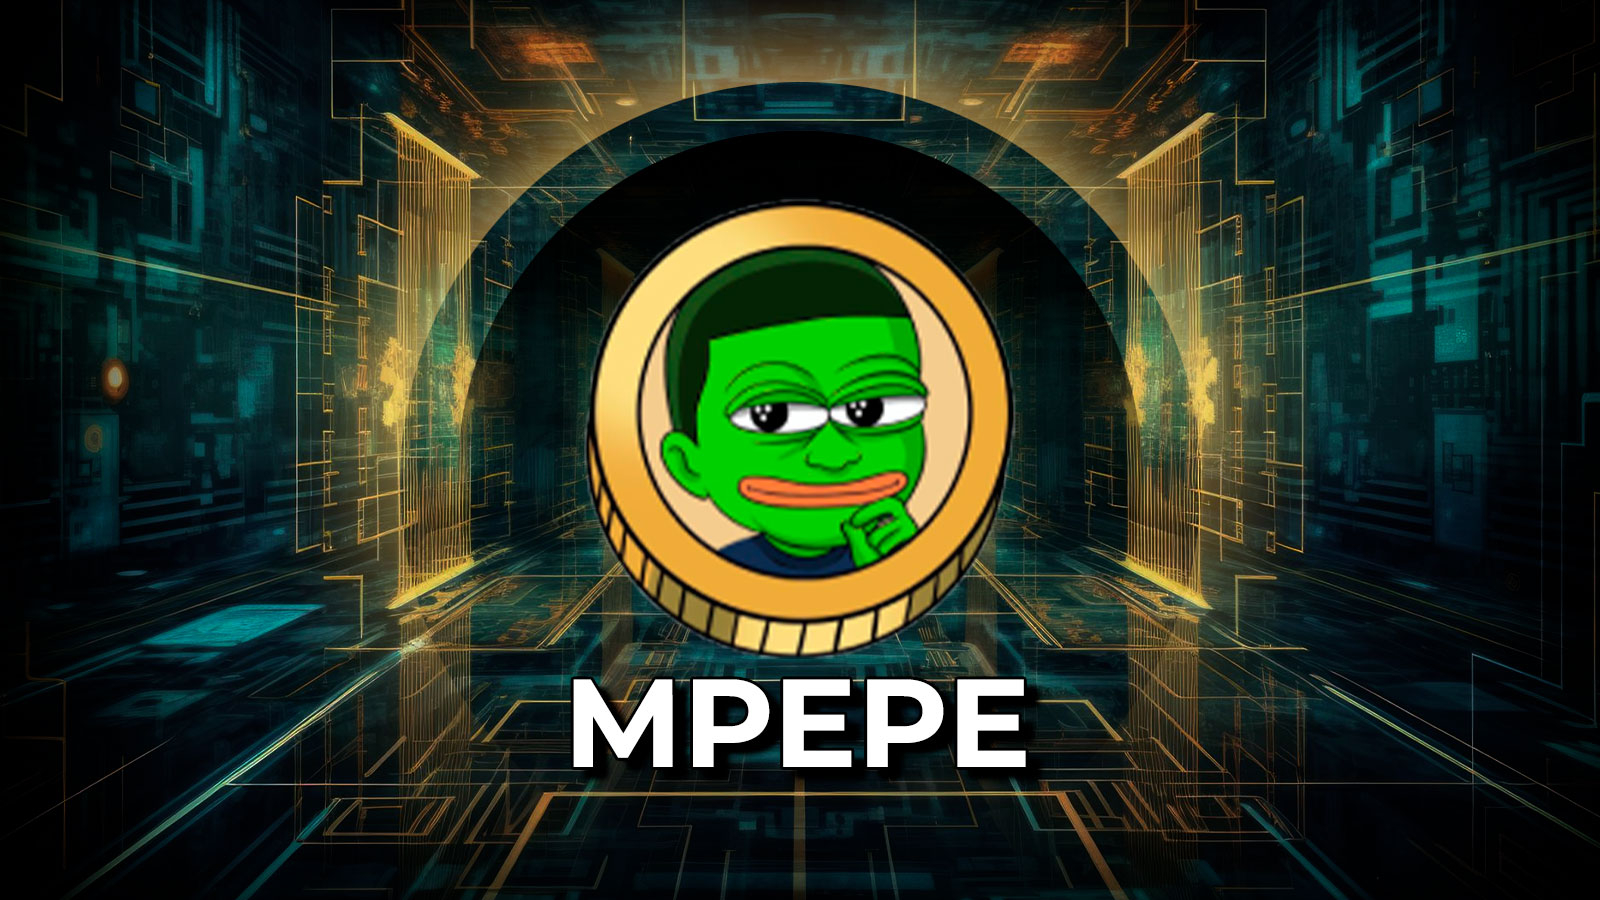 Mpeppe (MPEPE) is Set to Grow With Help of Community, Dogecoin (DOGE) Remains Strongest Meme